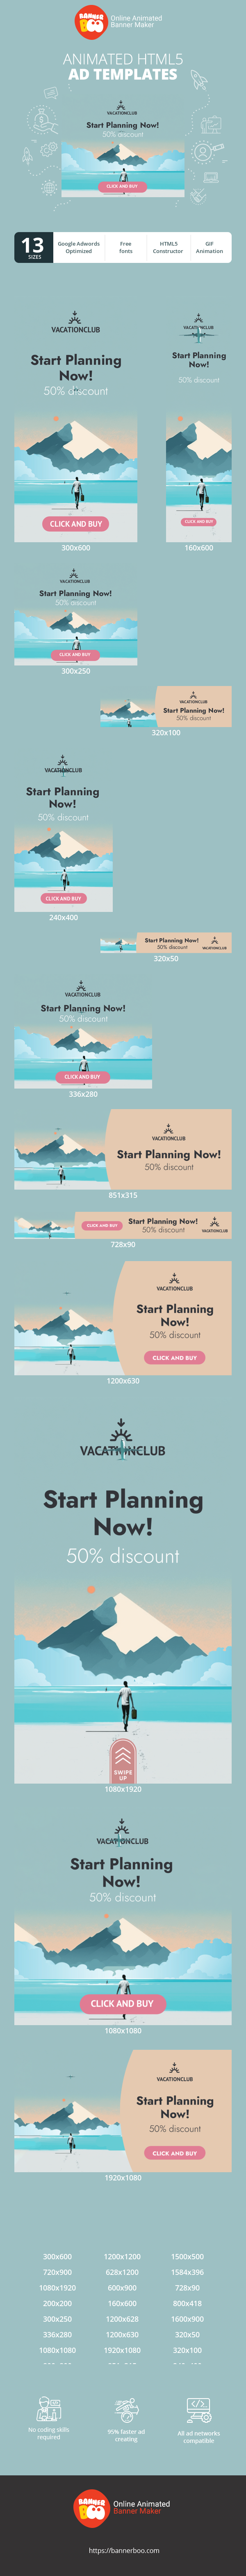 Banner ad template — Your New Vacation Awaits!